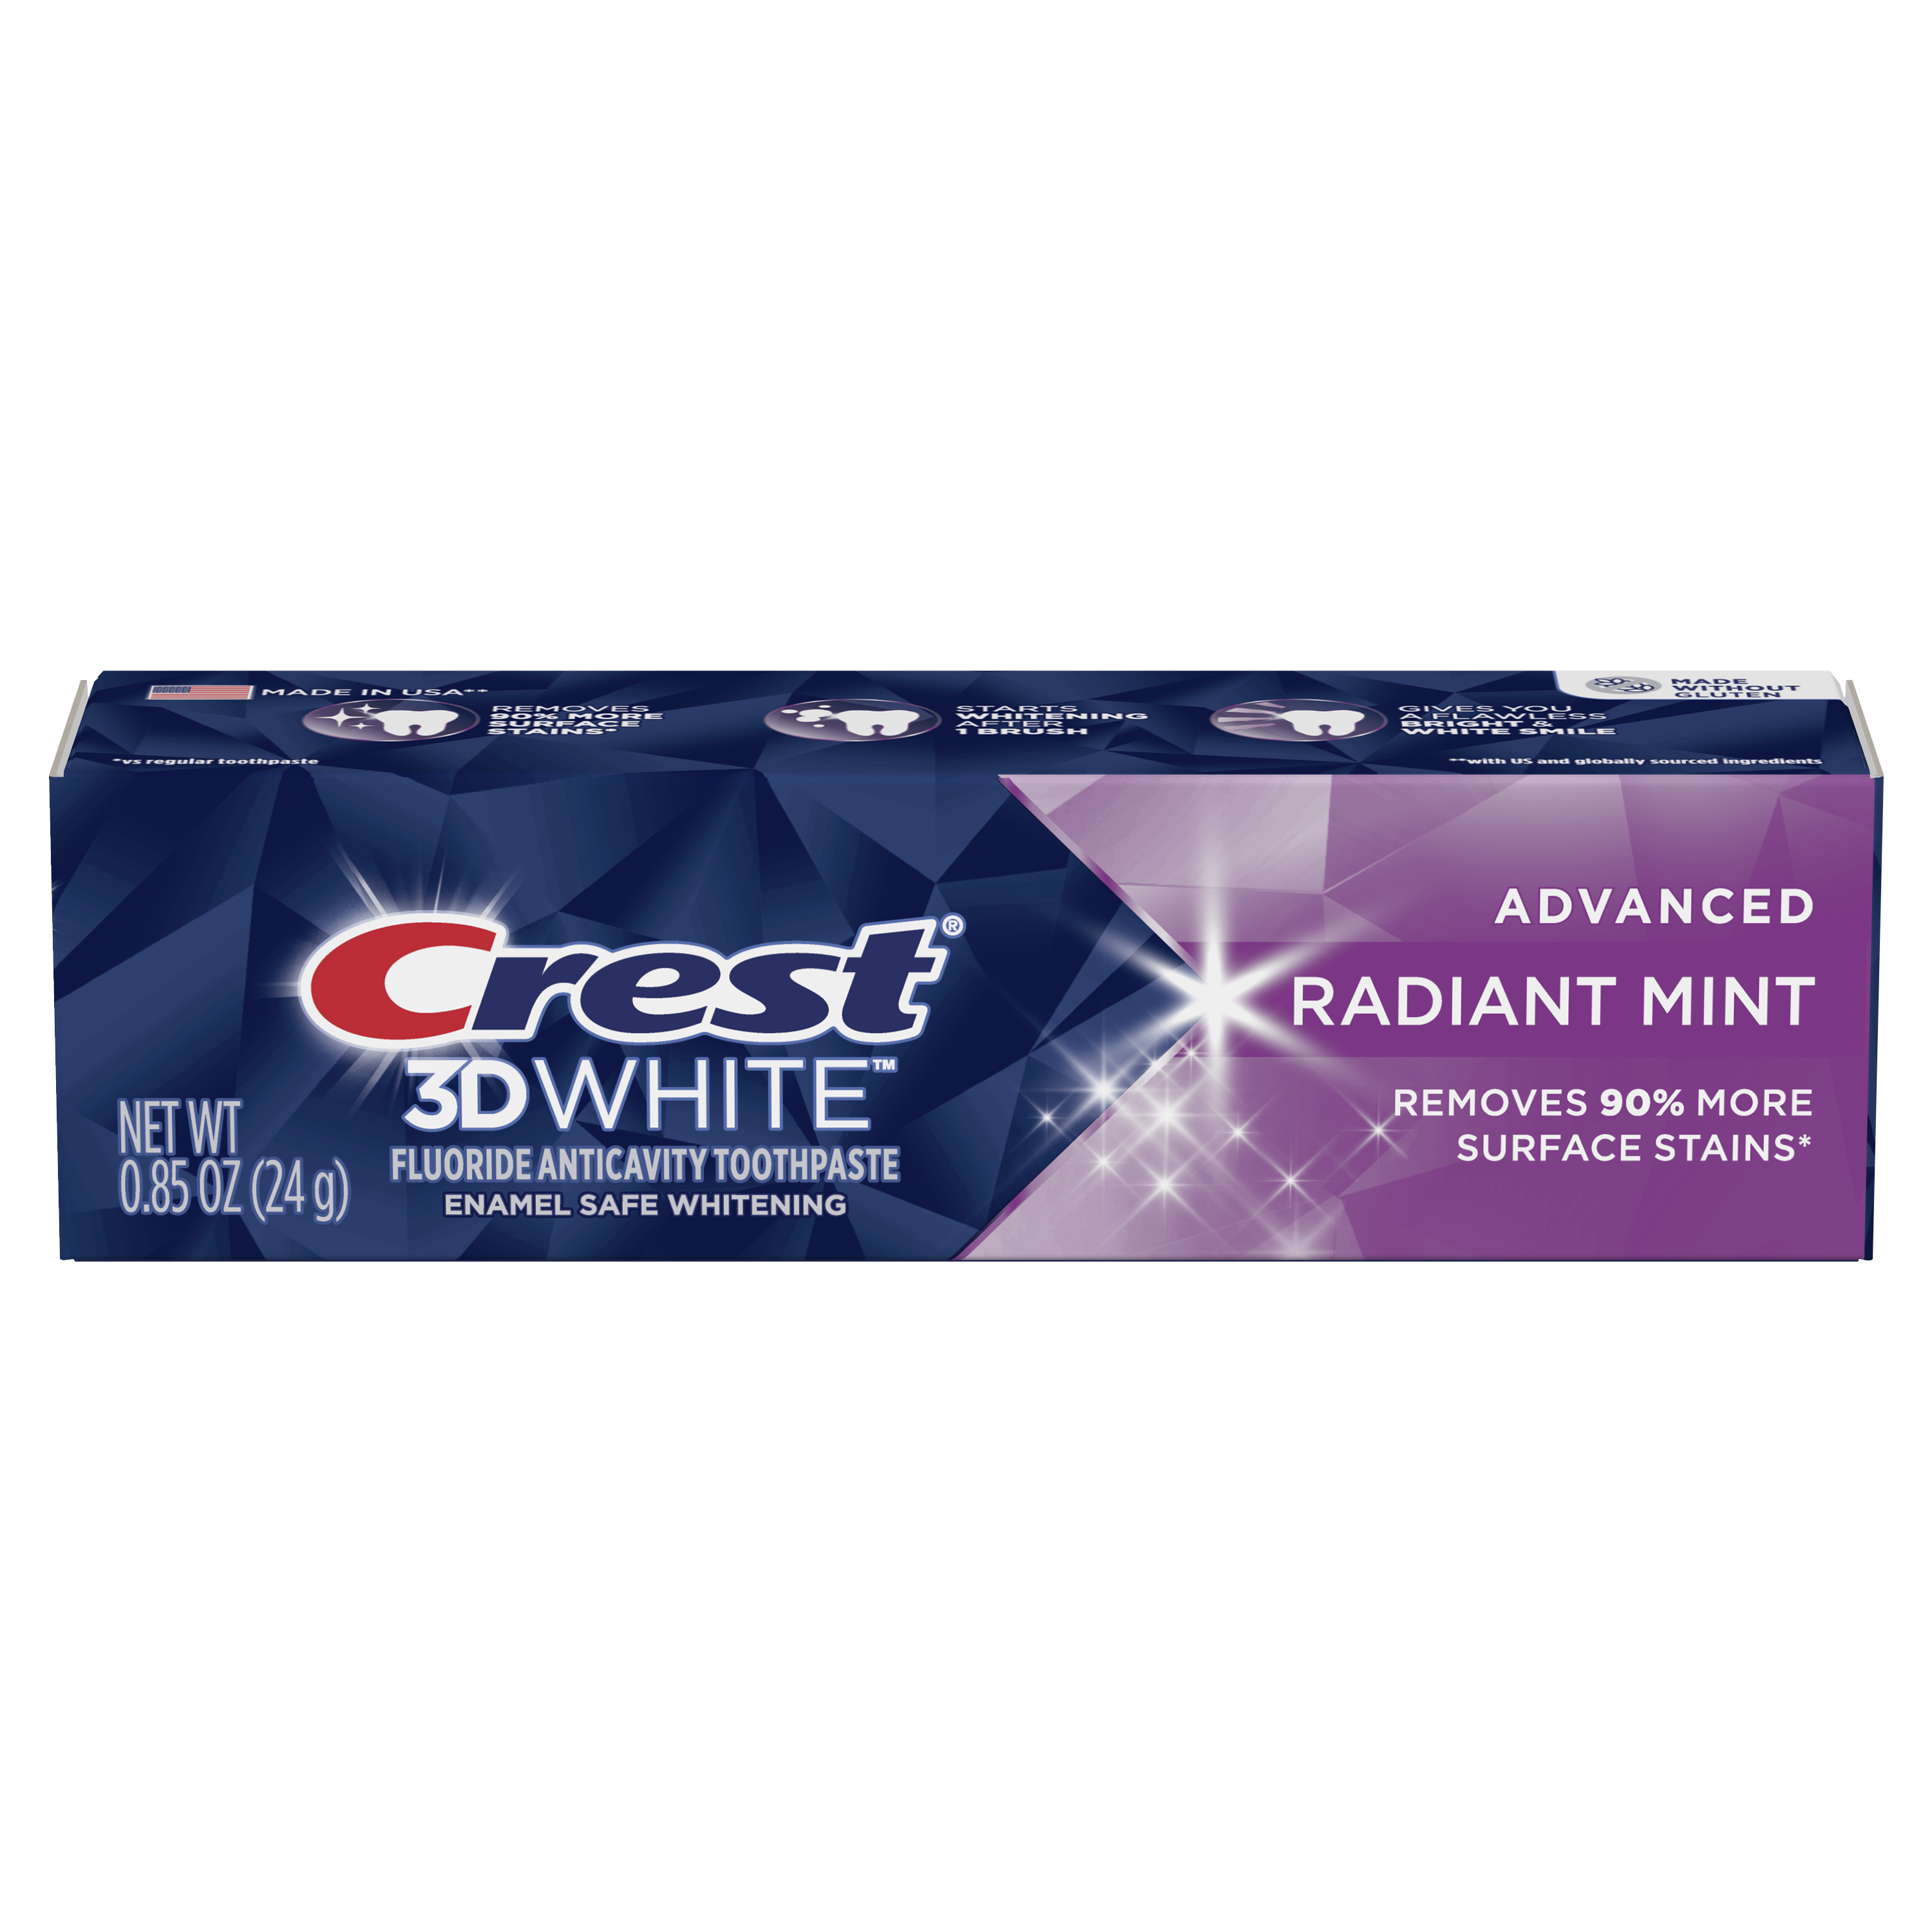 Crest 3D White Advanced Radiant Mint, Teeth Whitening Toothpaste, .85 oz - image 8 of 12